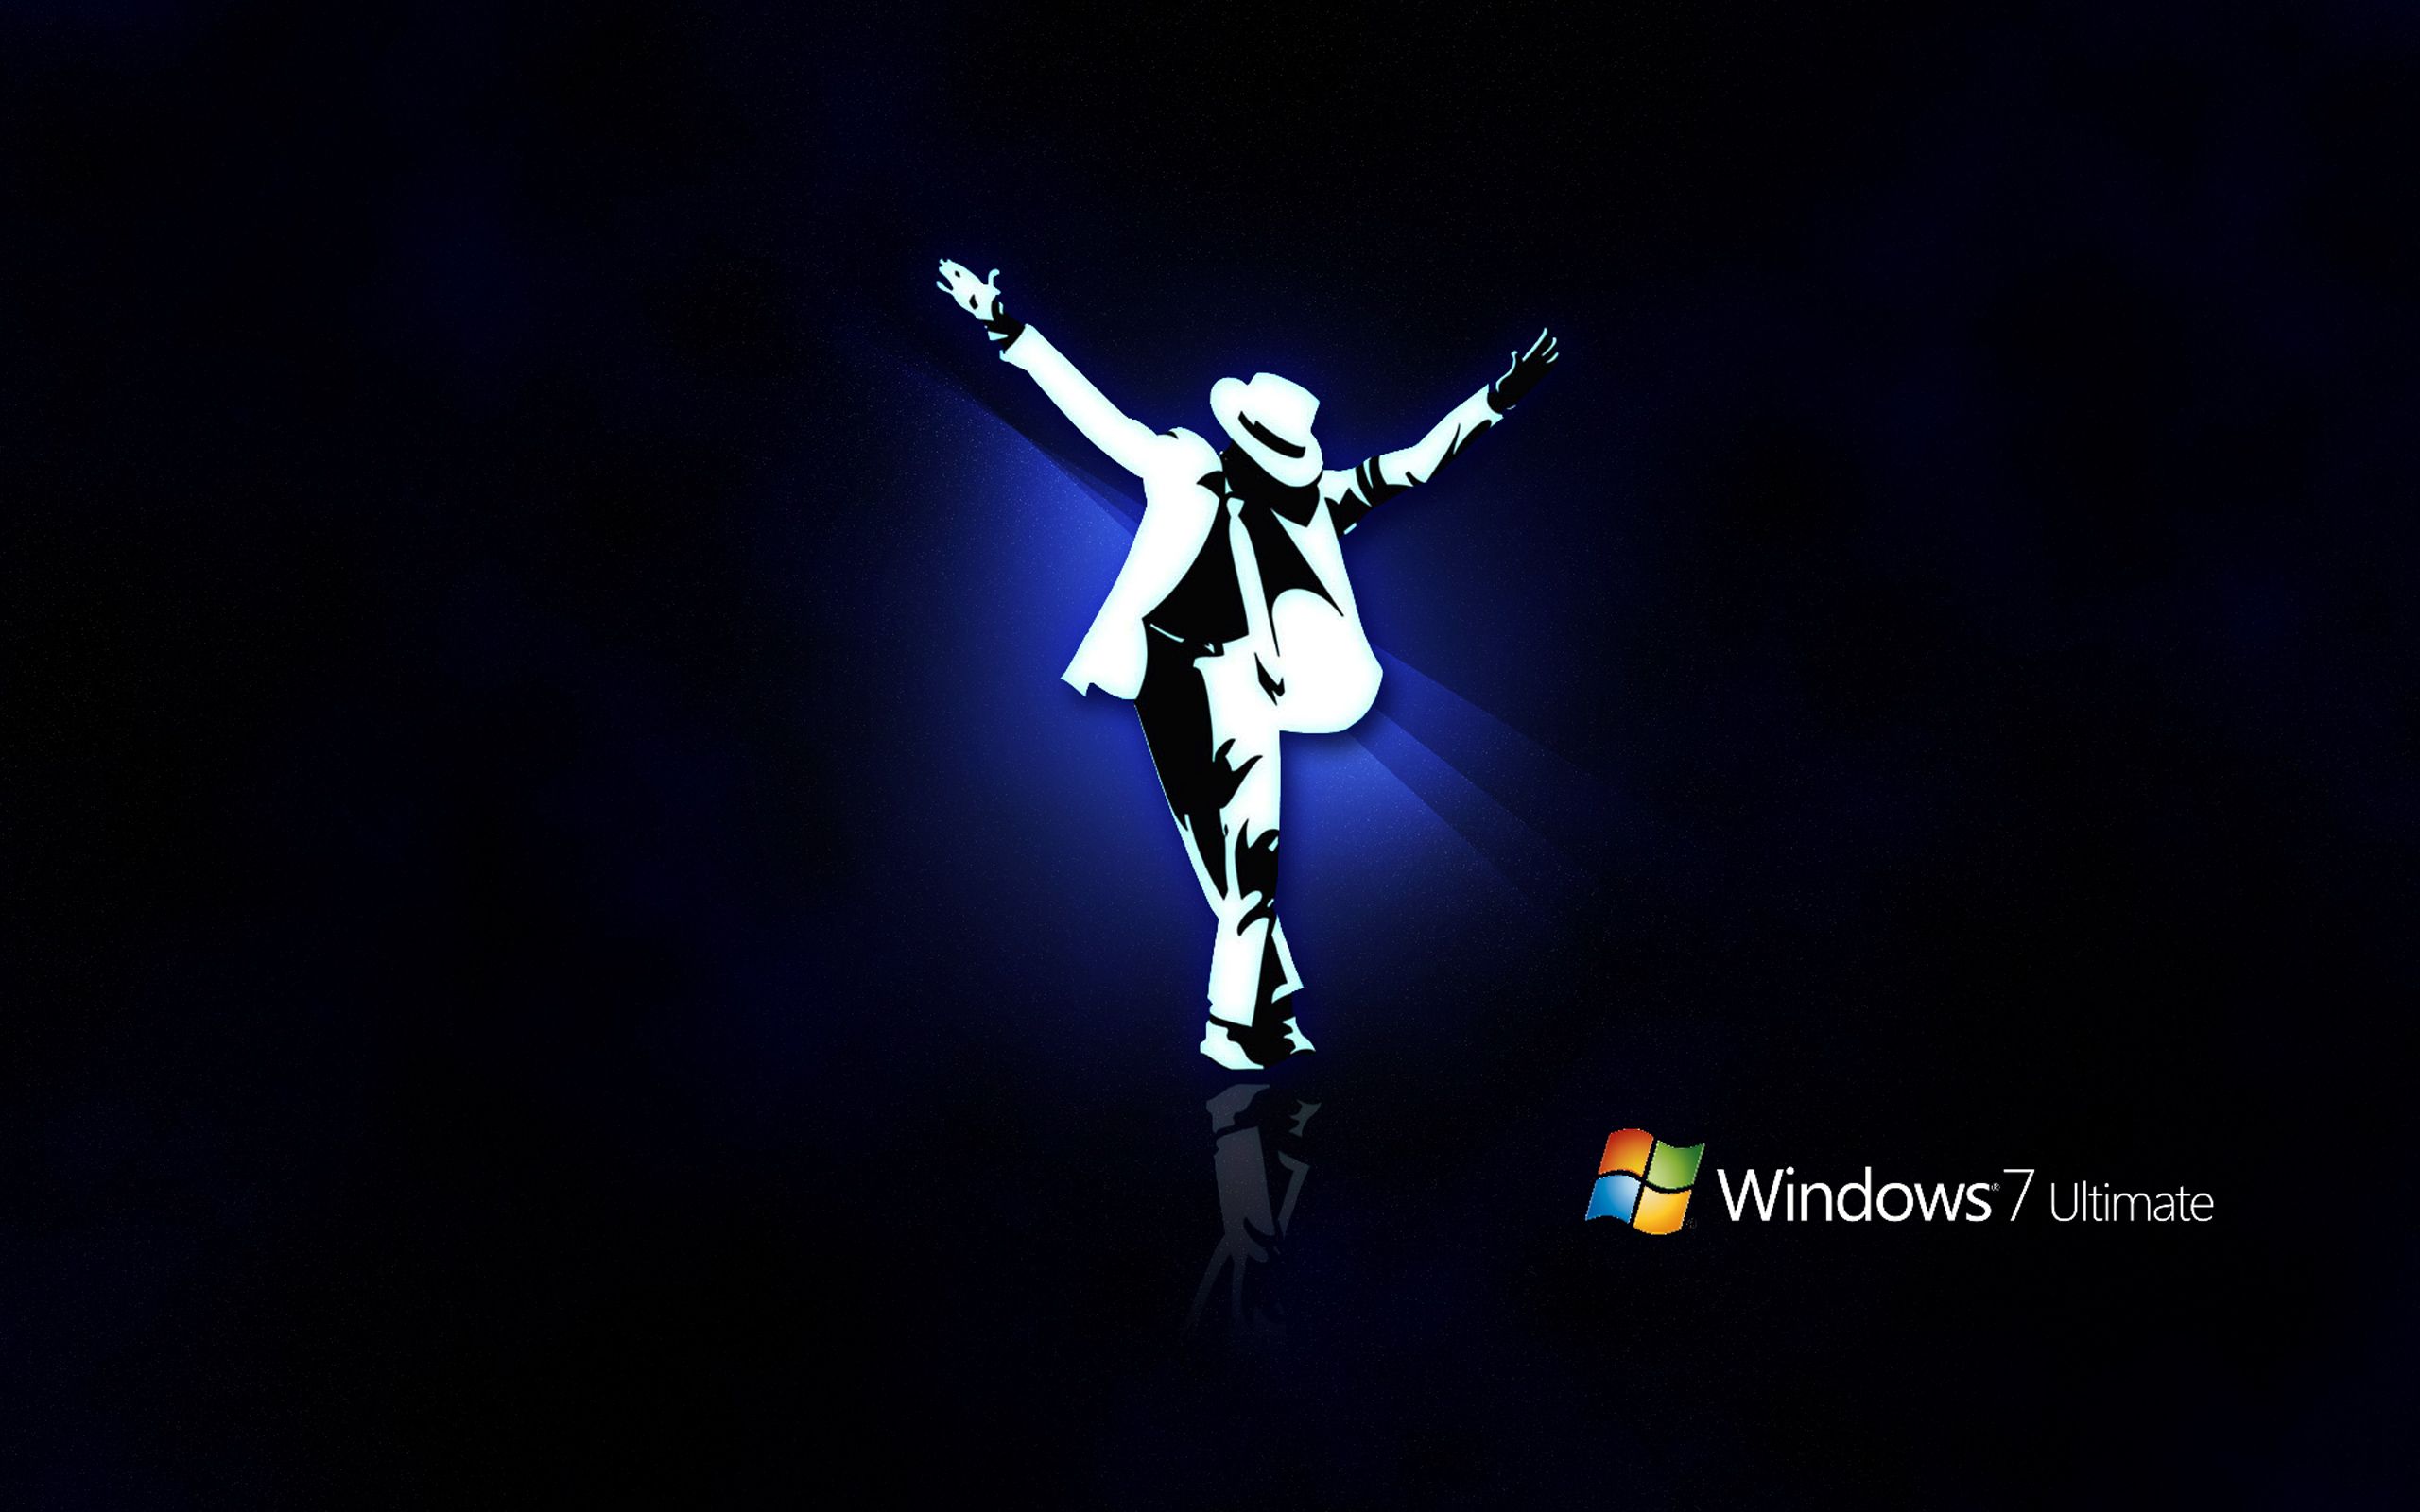 Microsoft windows 3d wallpaper Wallpapers, Backgrounds, Images